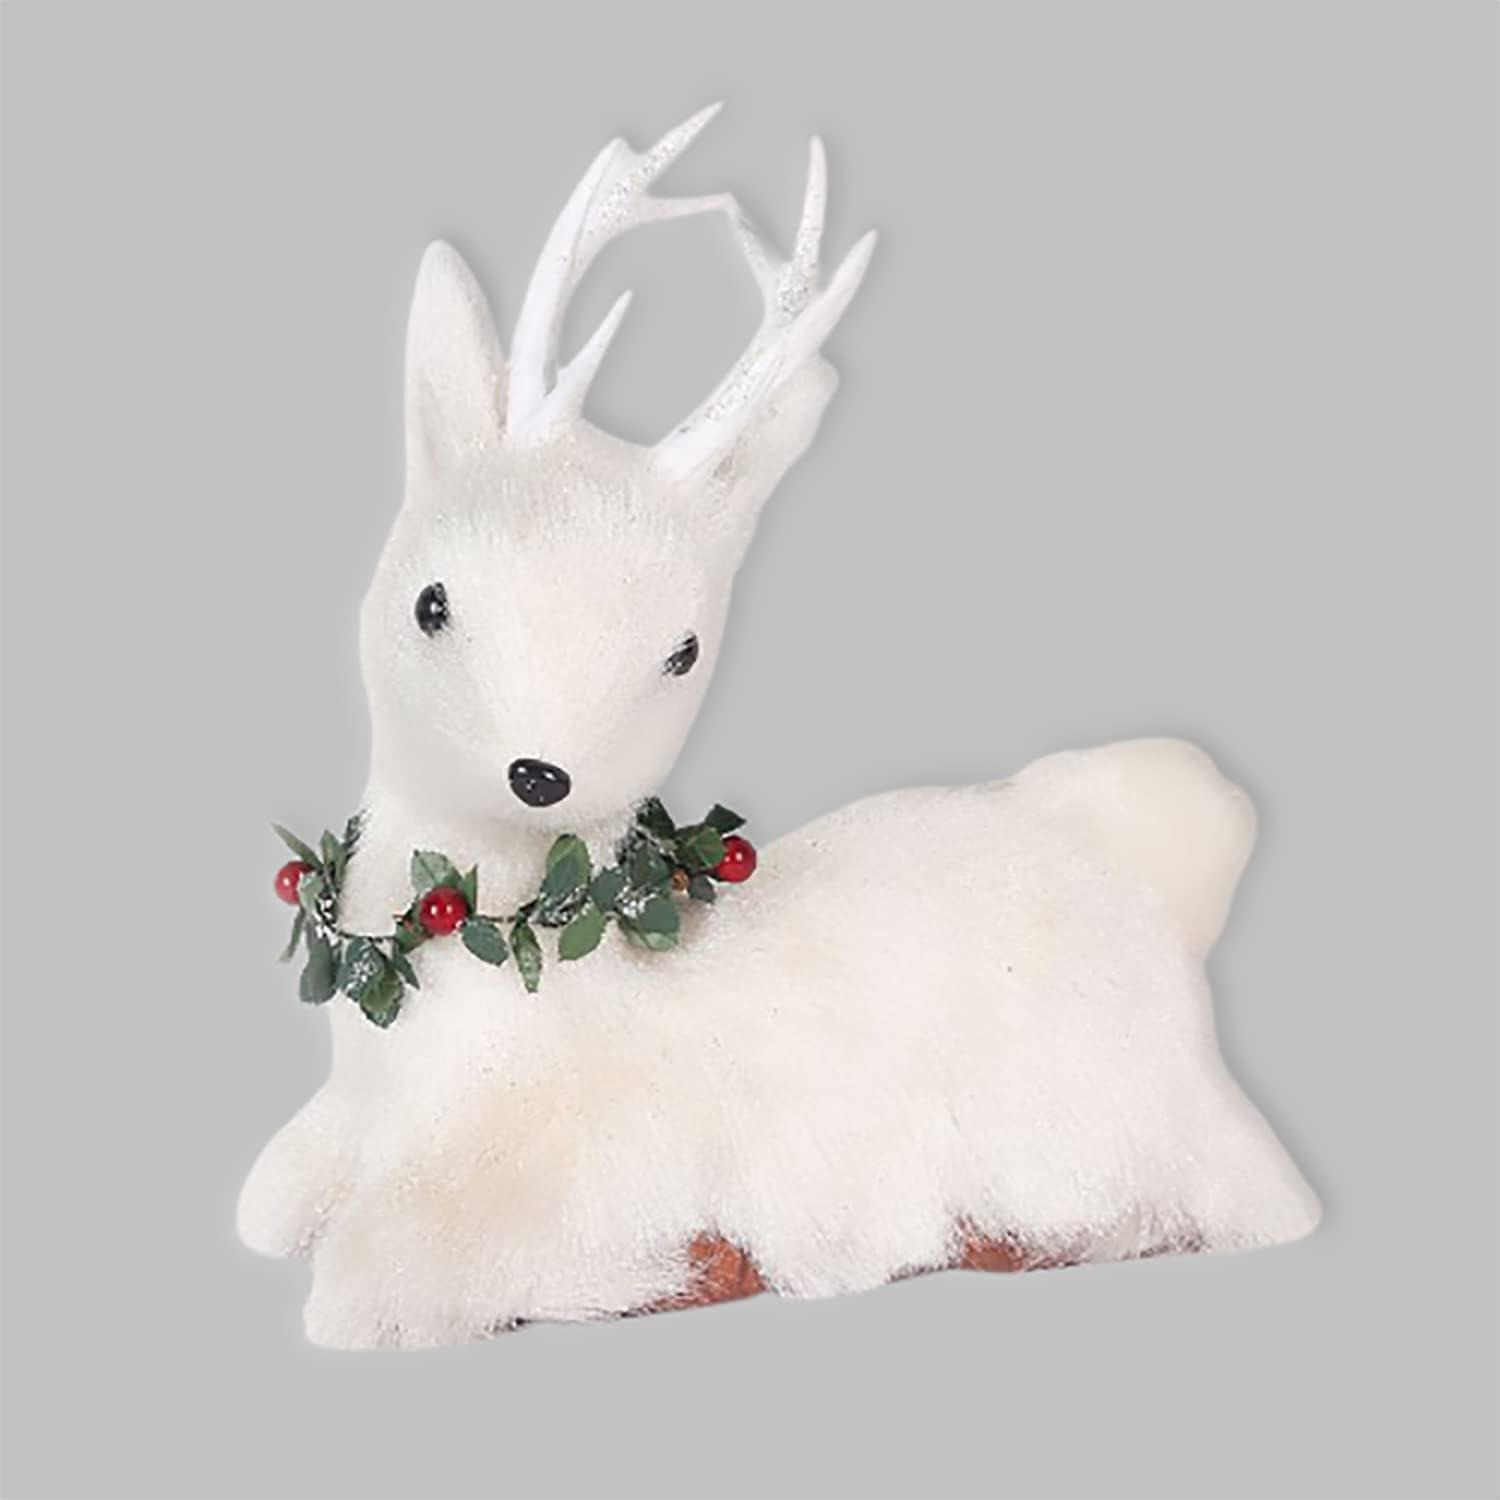 25cm Christmas Tabletop Decorated with Pines Berries Showpieces decoration, White Lying Deer - image 1